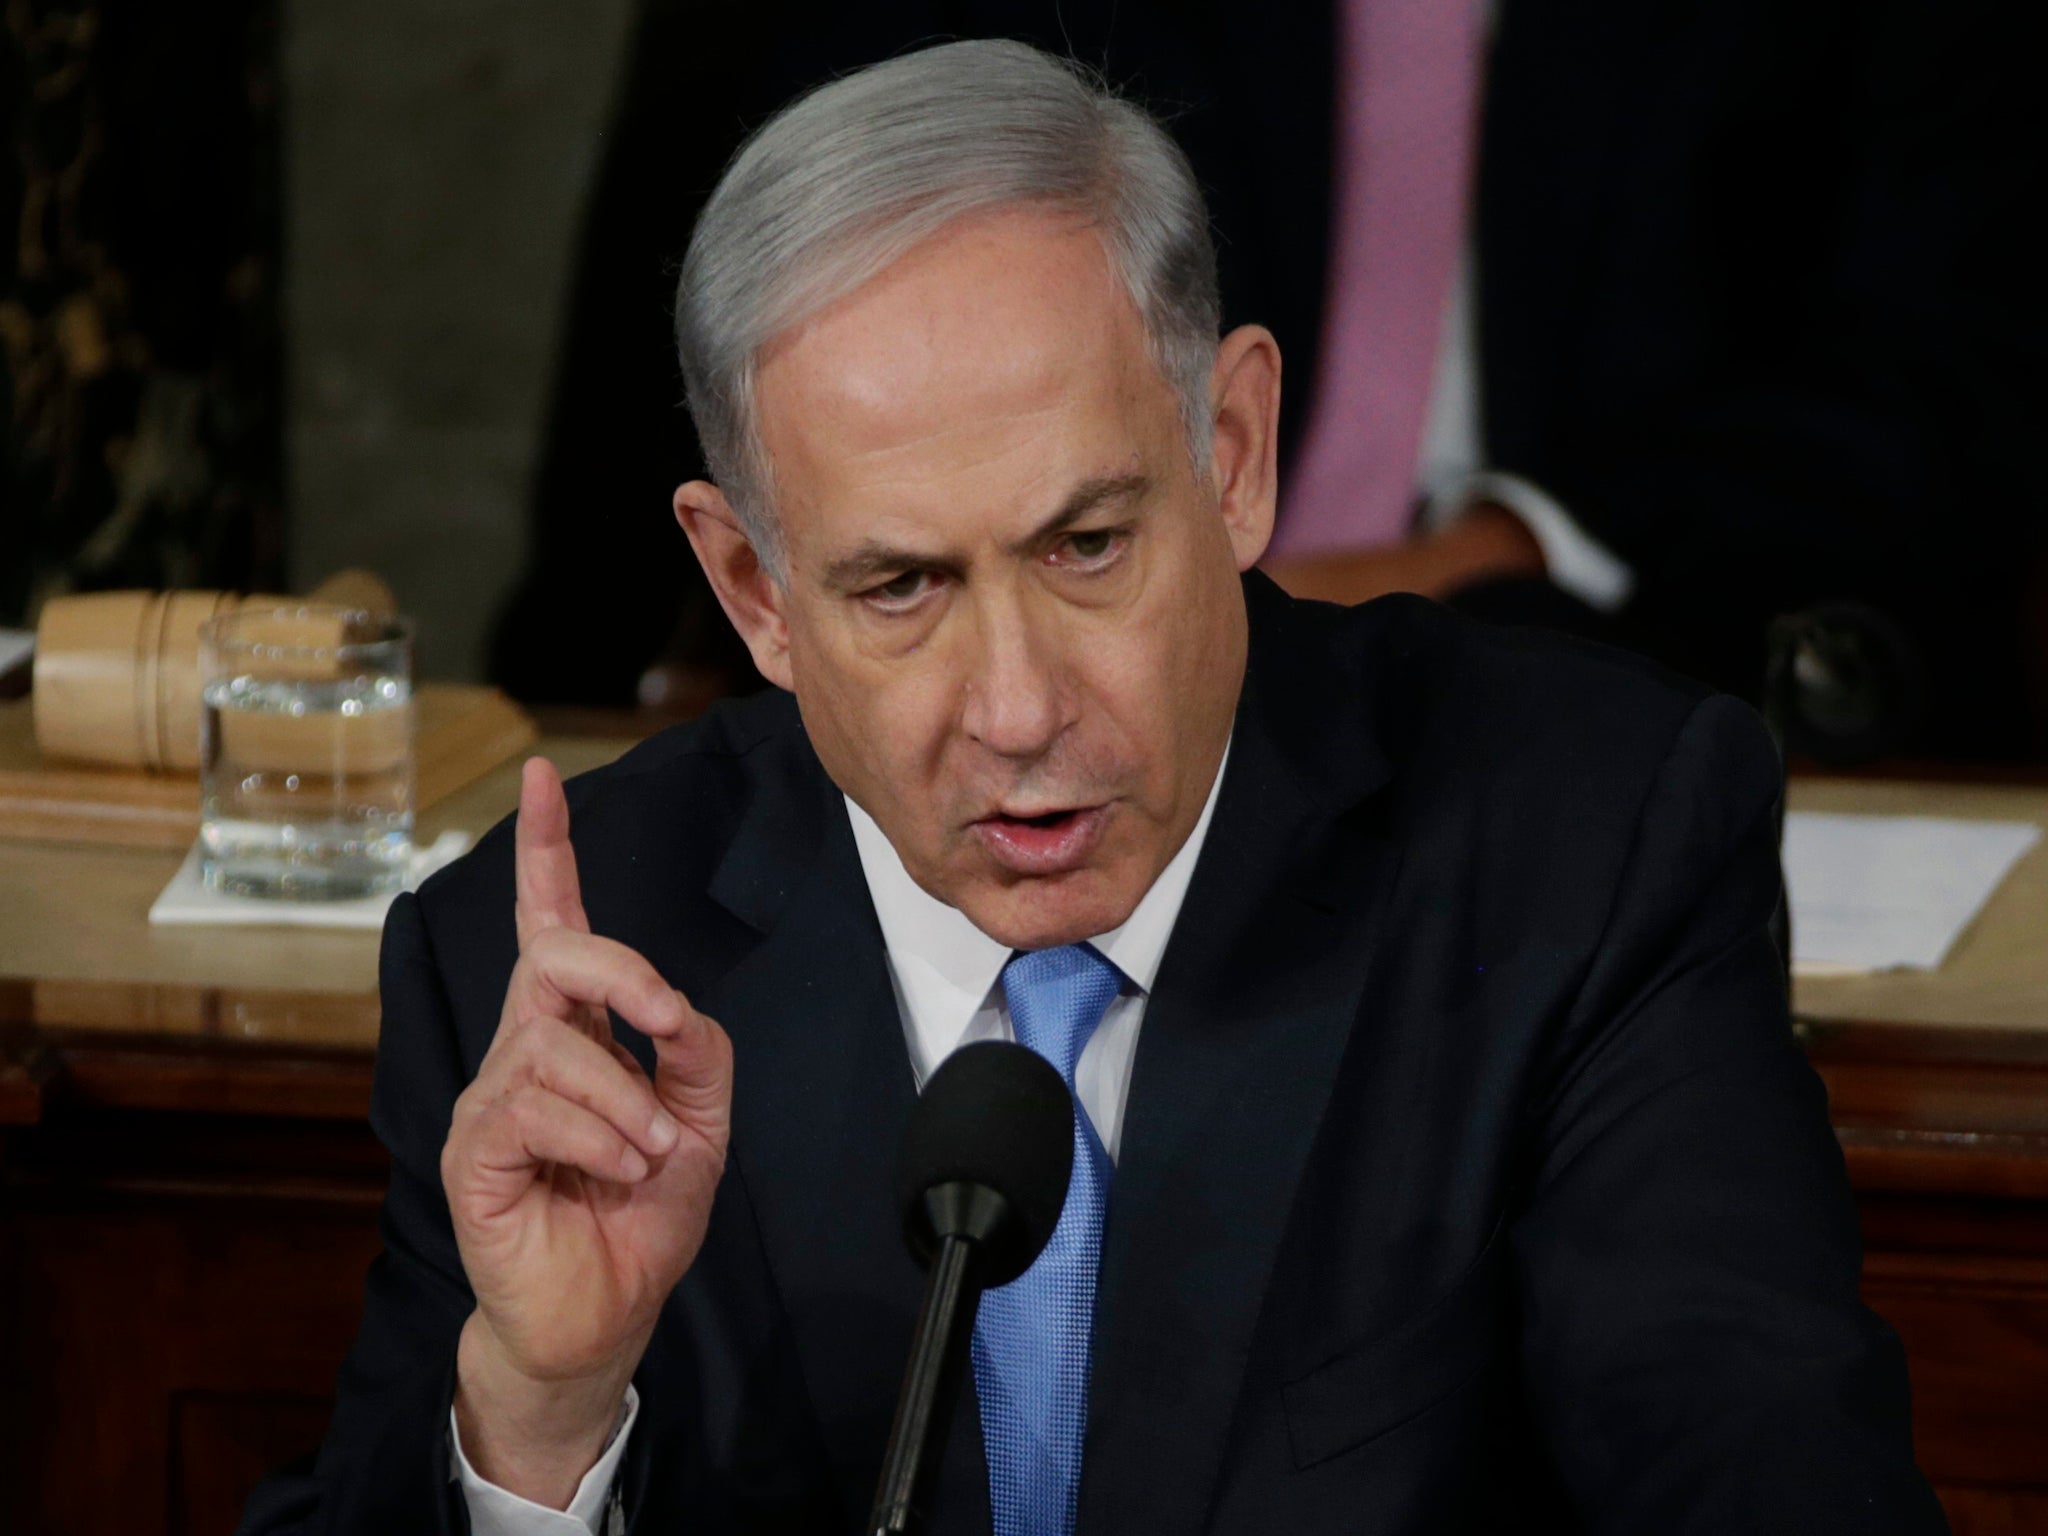 Benjamin Netanyahu spoke against an emerging deal with Iran at a a joint session of US Congress